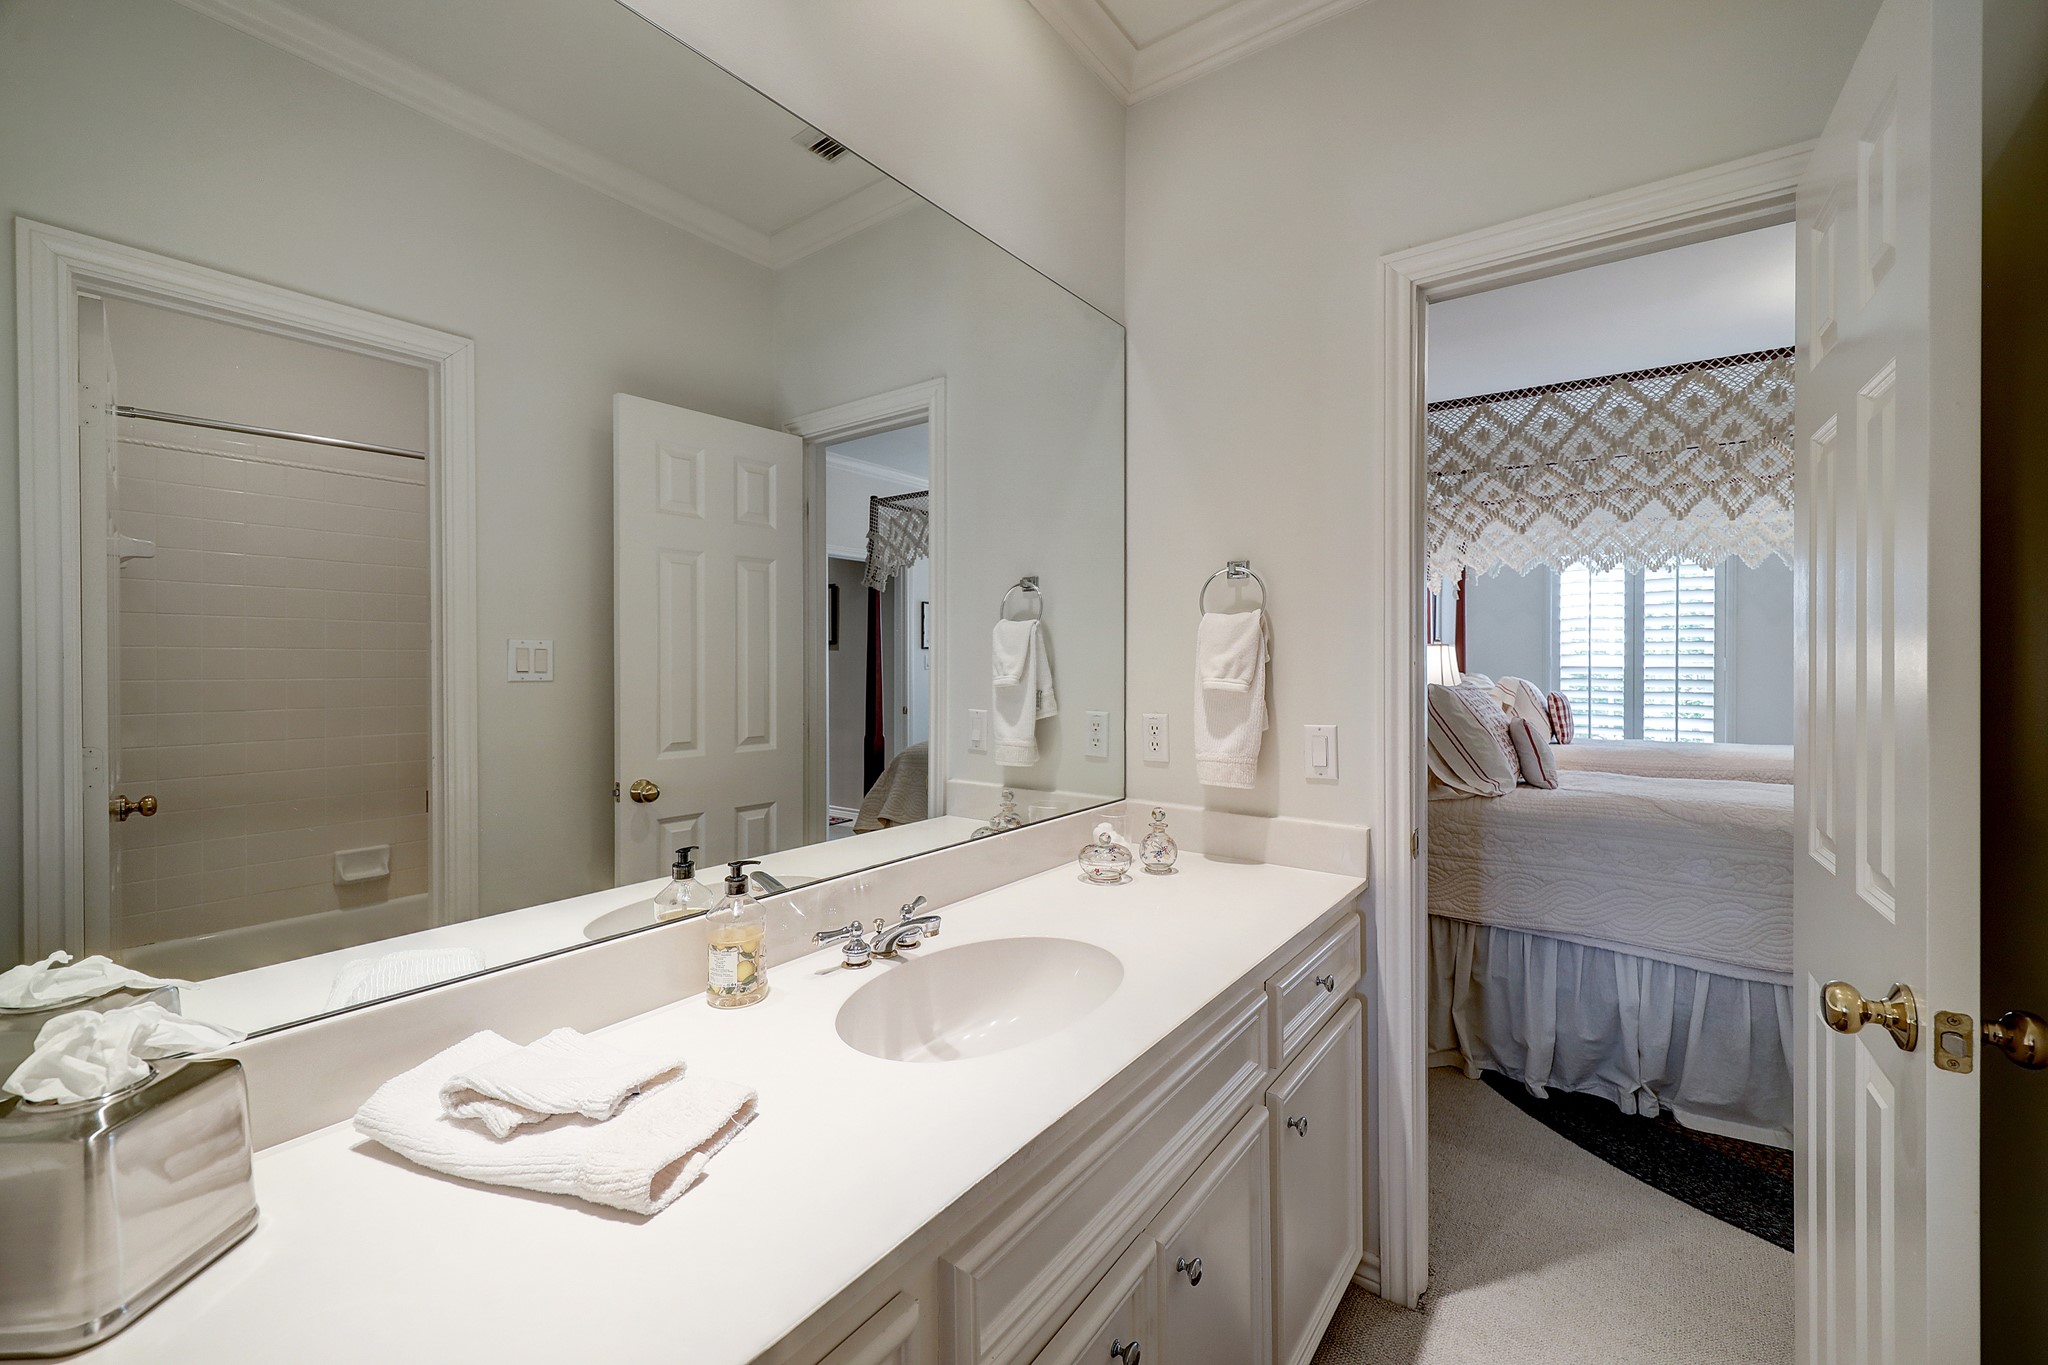 The Jack 'n' Jill bathroom connects the two bedrooms.